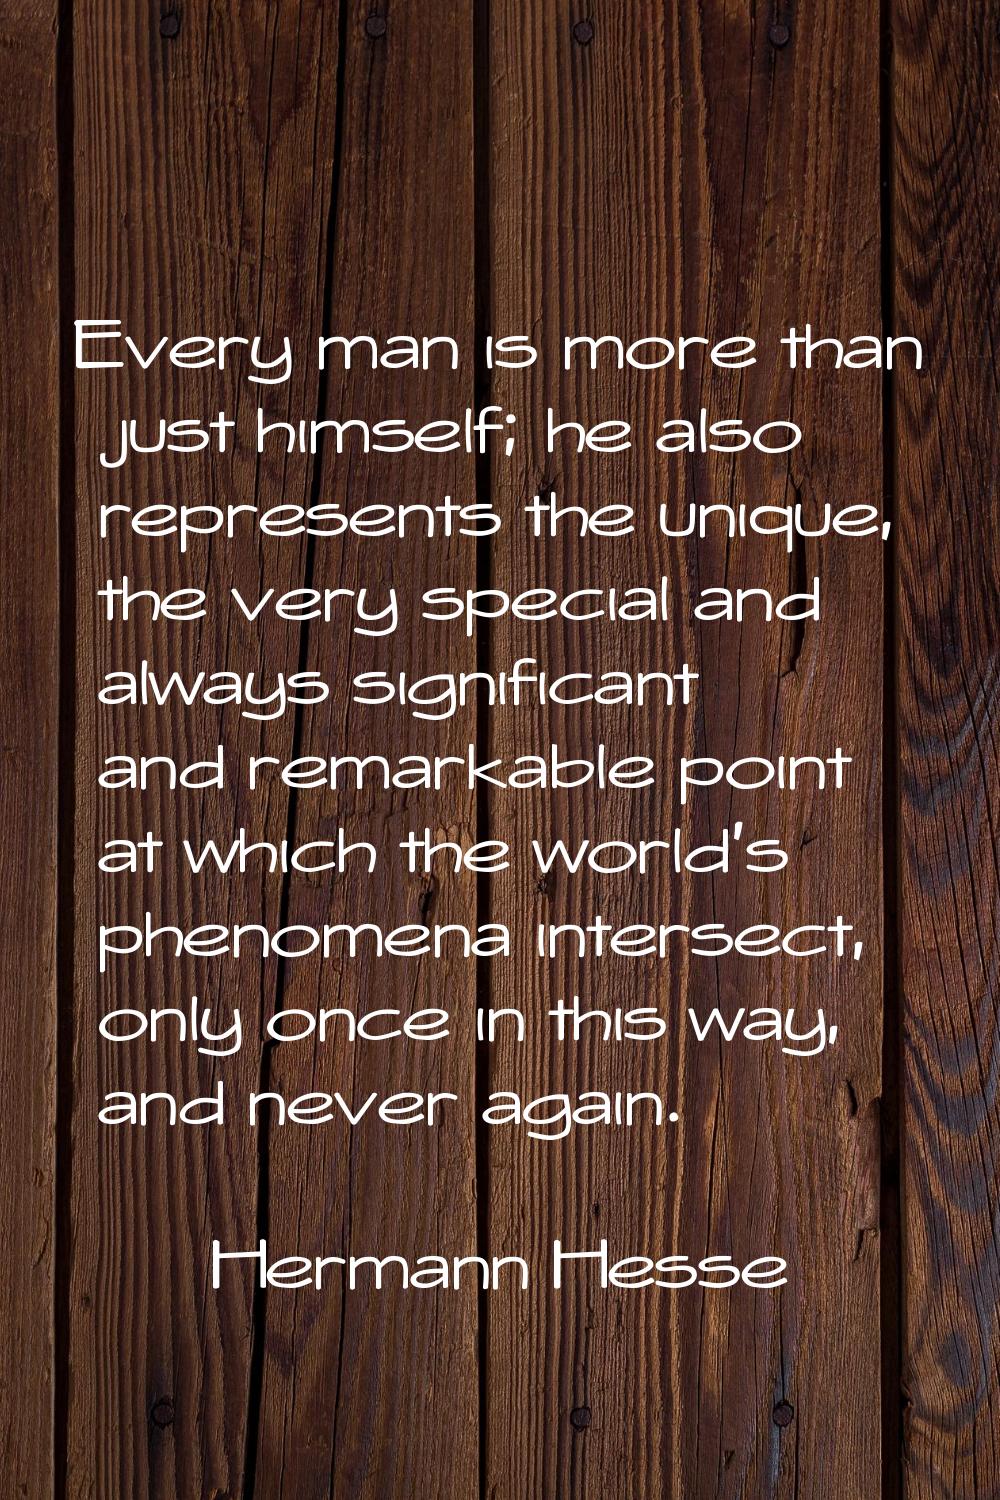 Every man is more than just himself; he also represents the unique, the very special and always sig